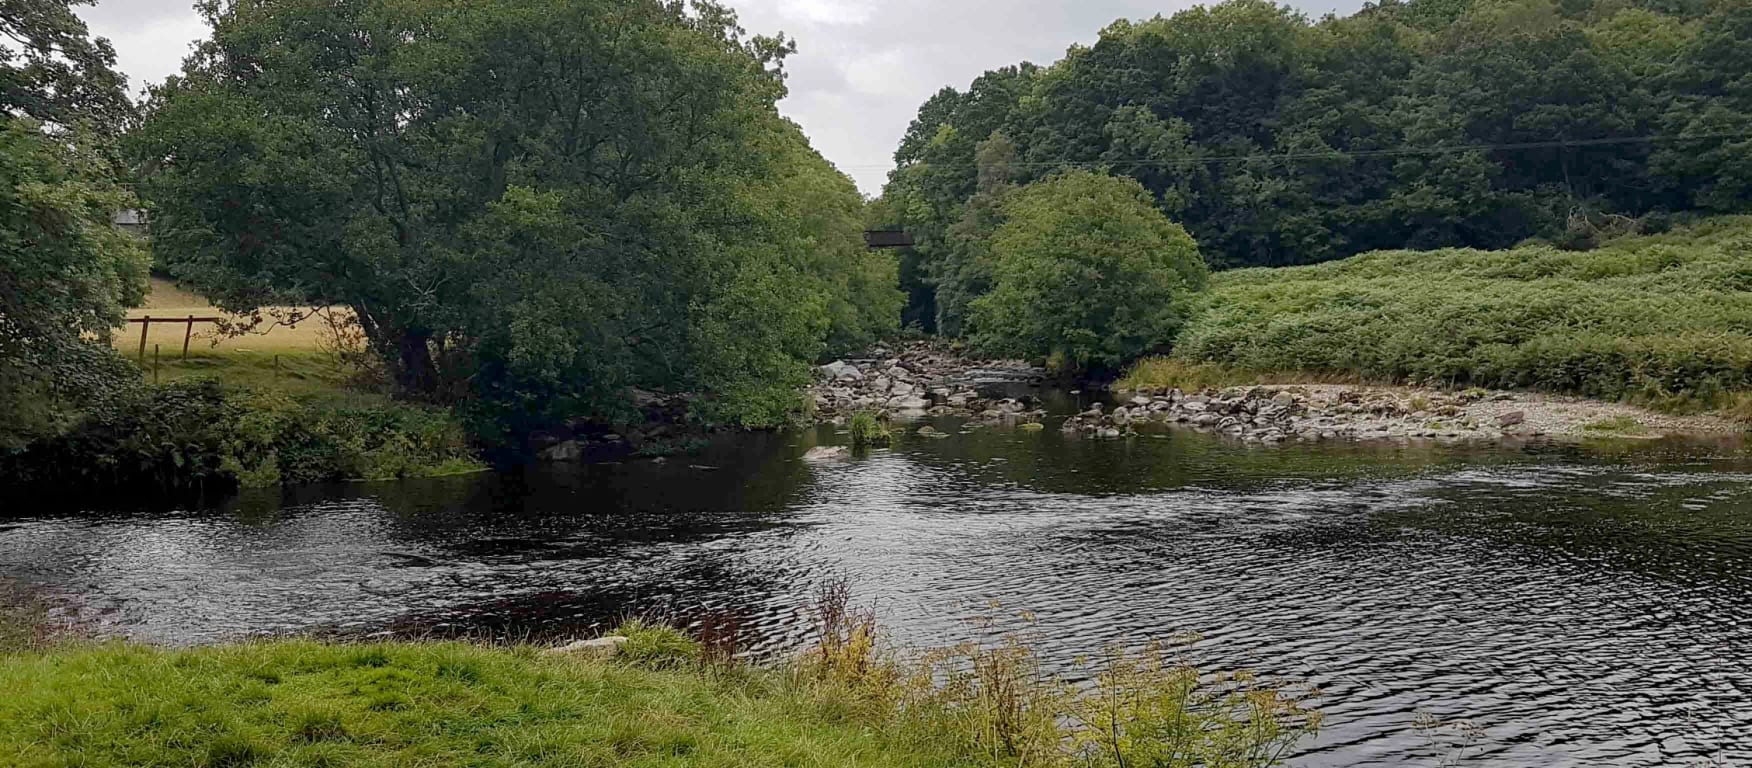 The confluence of the Elan (flowing left to right in the picture and the Wye in July this year. The tributary was estimated to be making up over 75% of the flow at the time